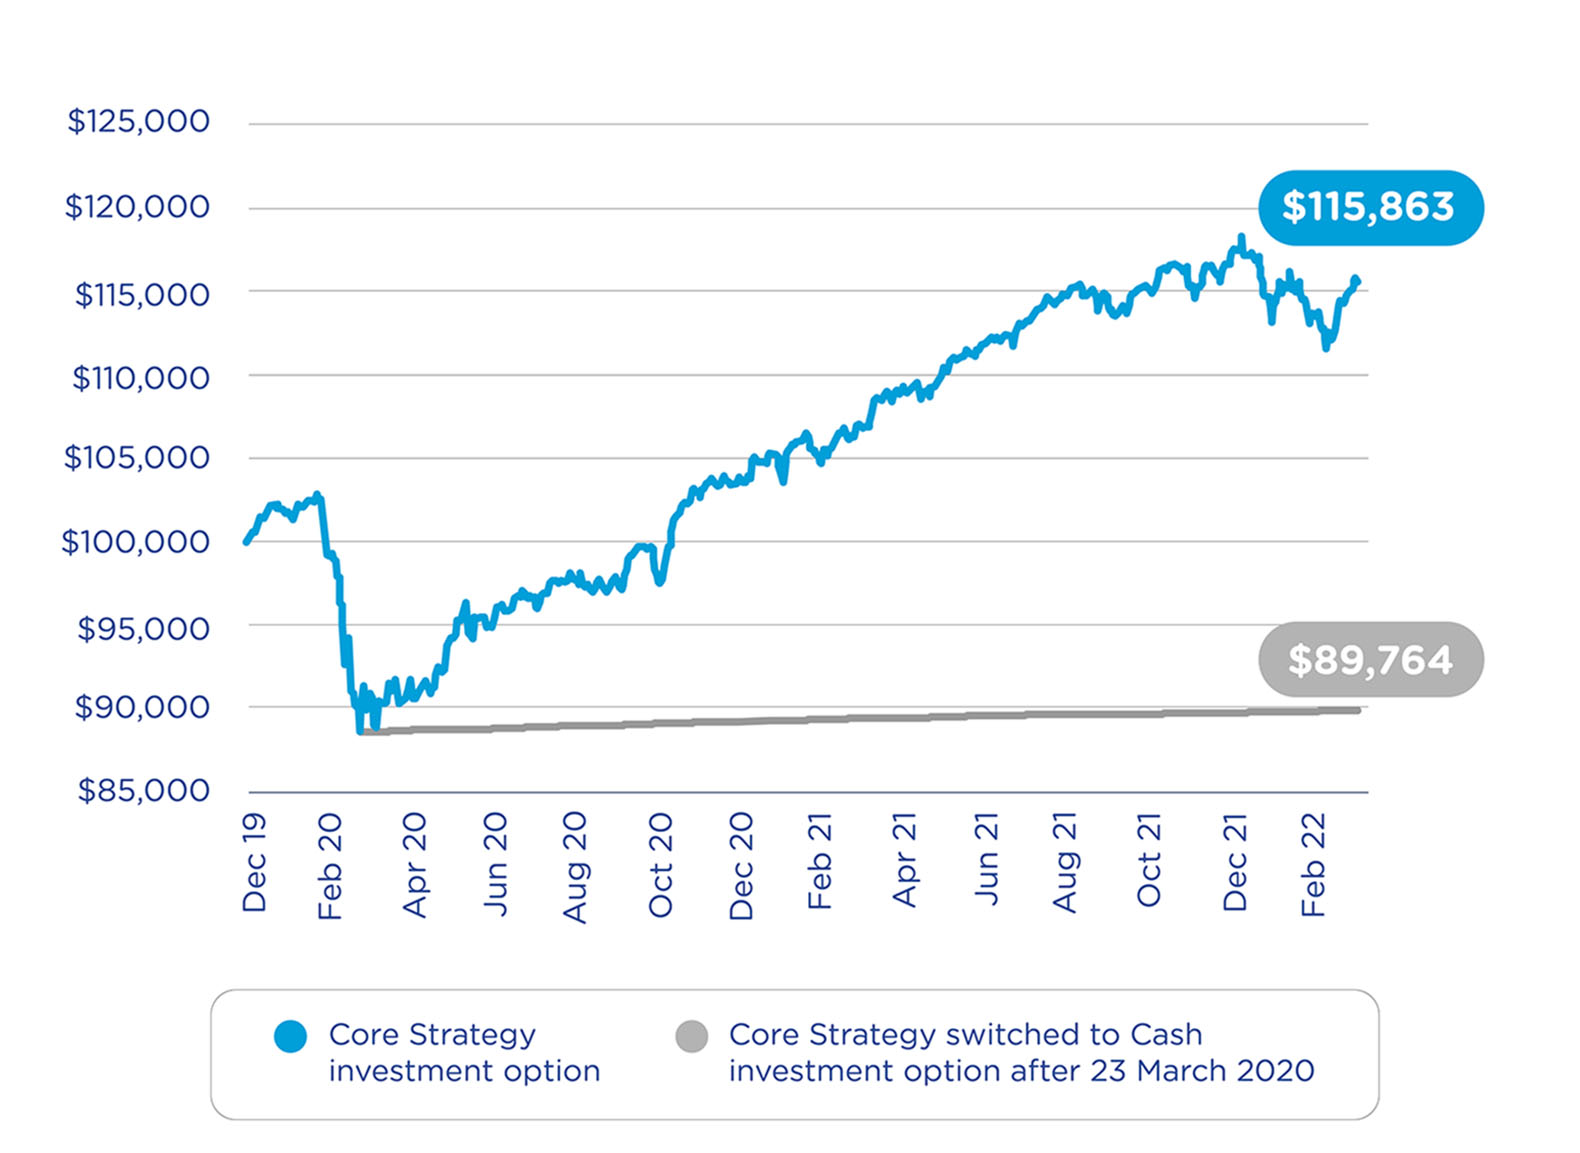 Investment of $100,000 from 31 December 2019 Core Strategy and Cash investment options